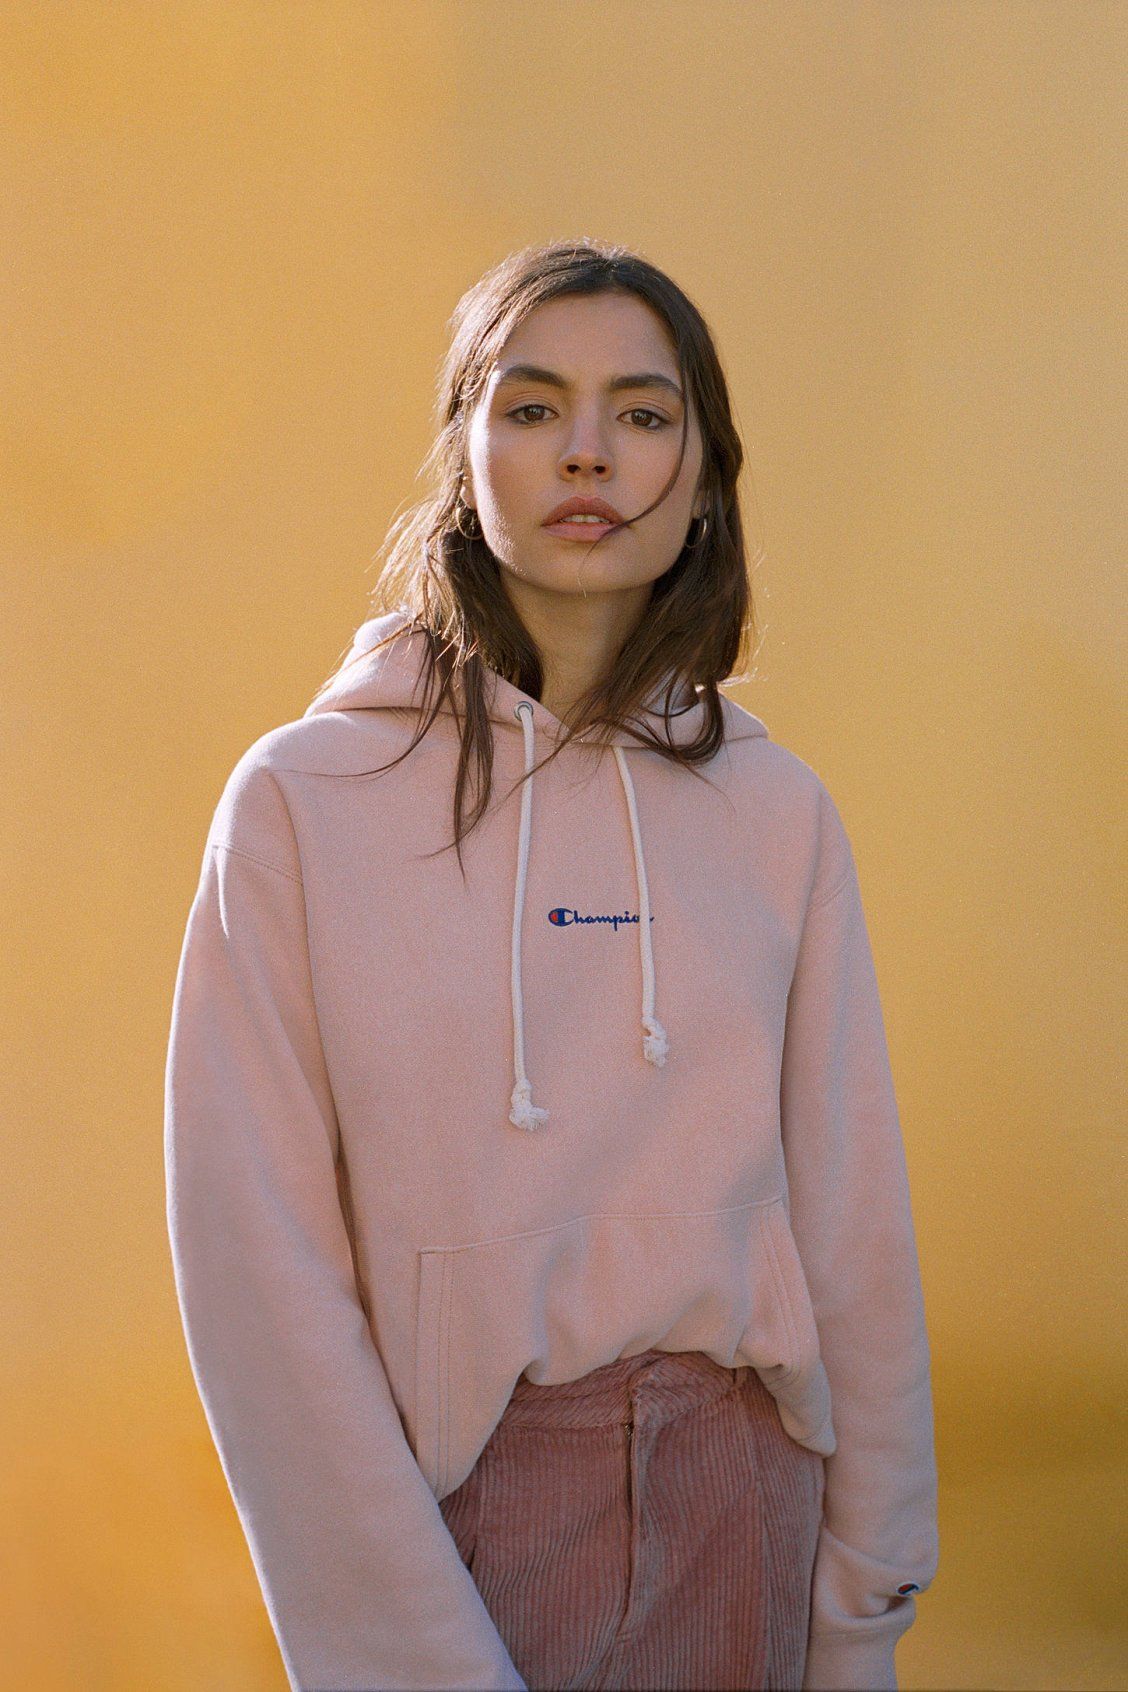 The Most Affordable Sweatshirts Are Favoured By Fashion Editors